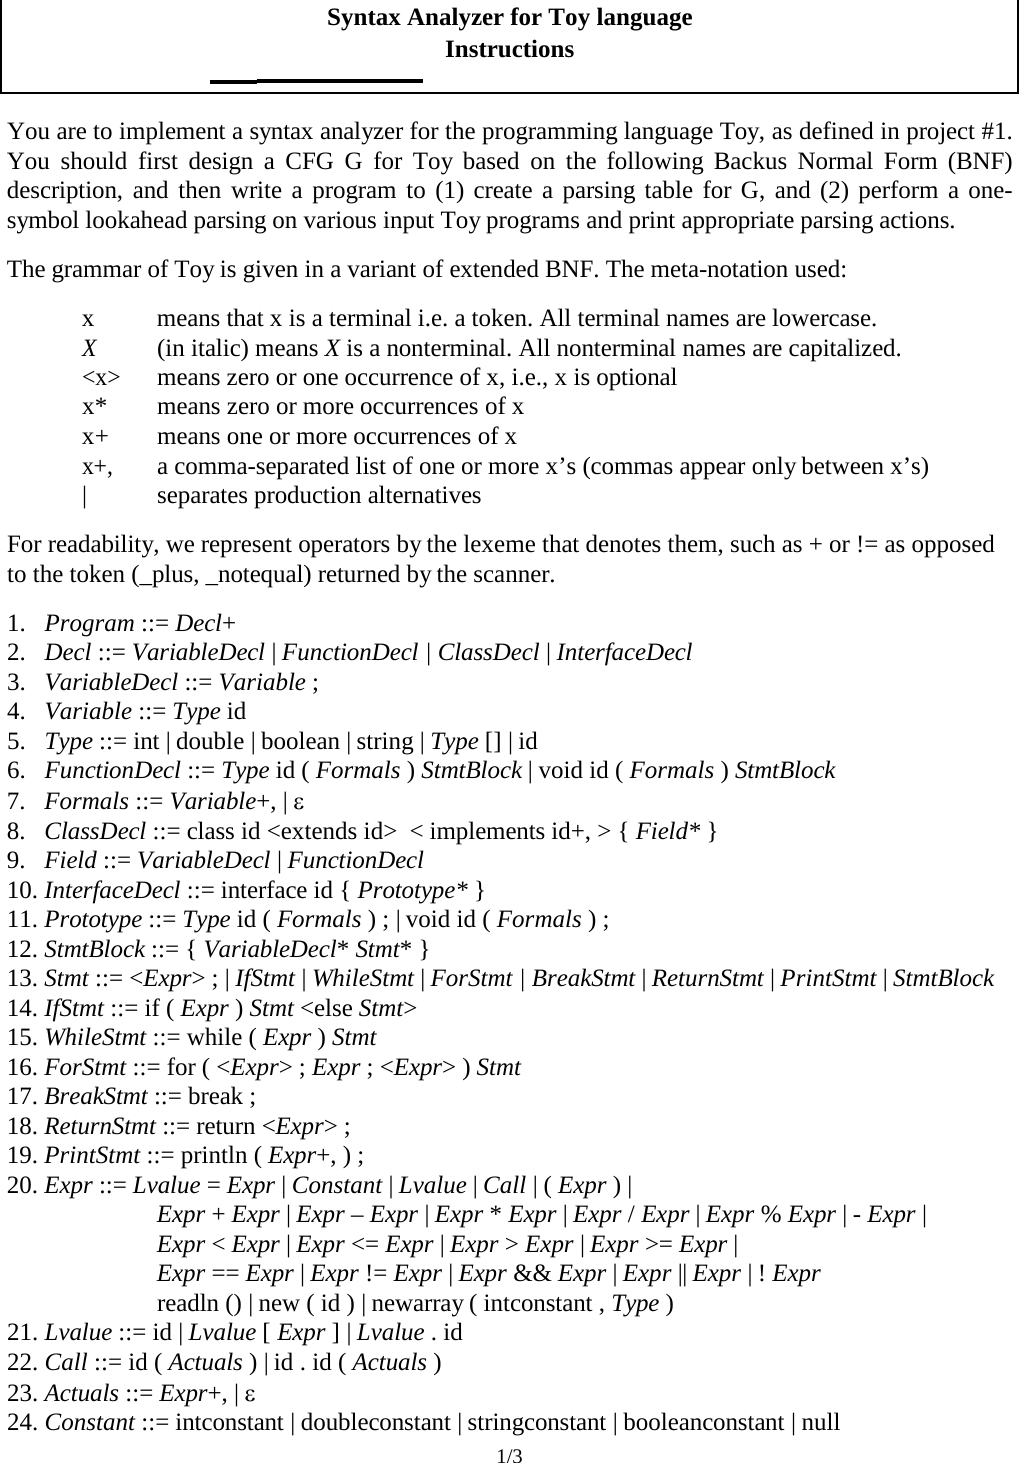 Page 1 of 3 - CS 440 Compiler Design I Instructions